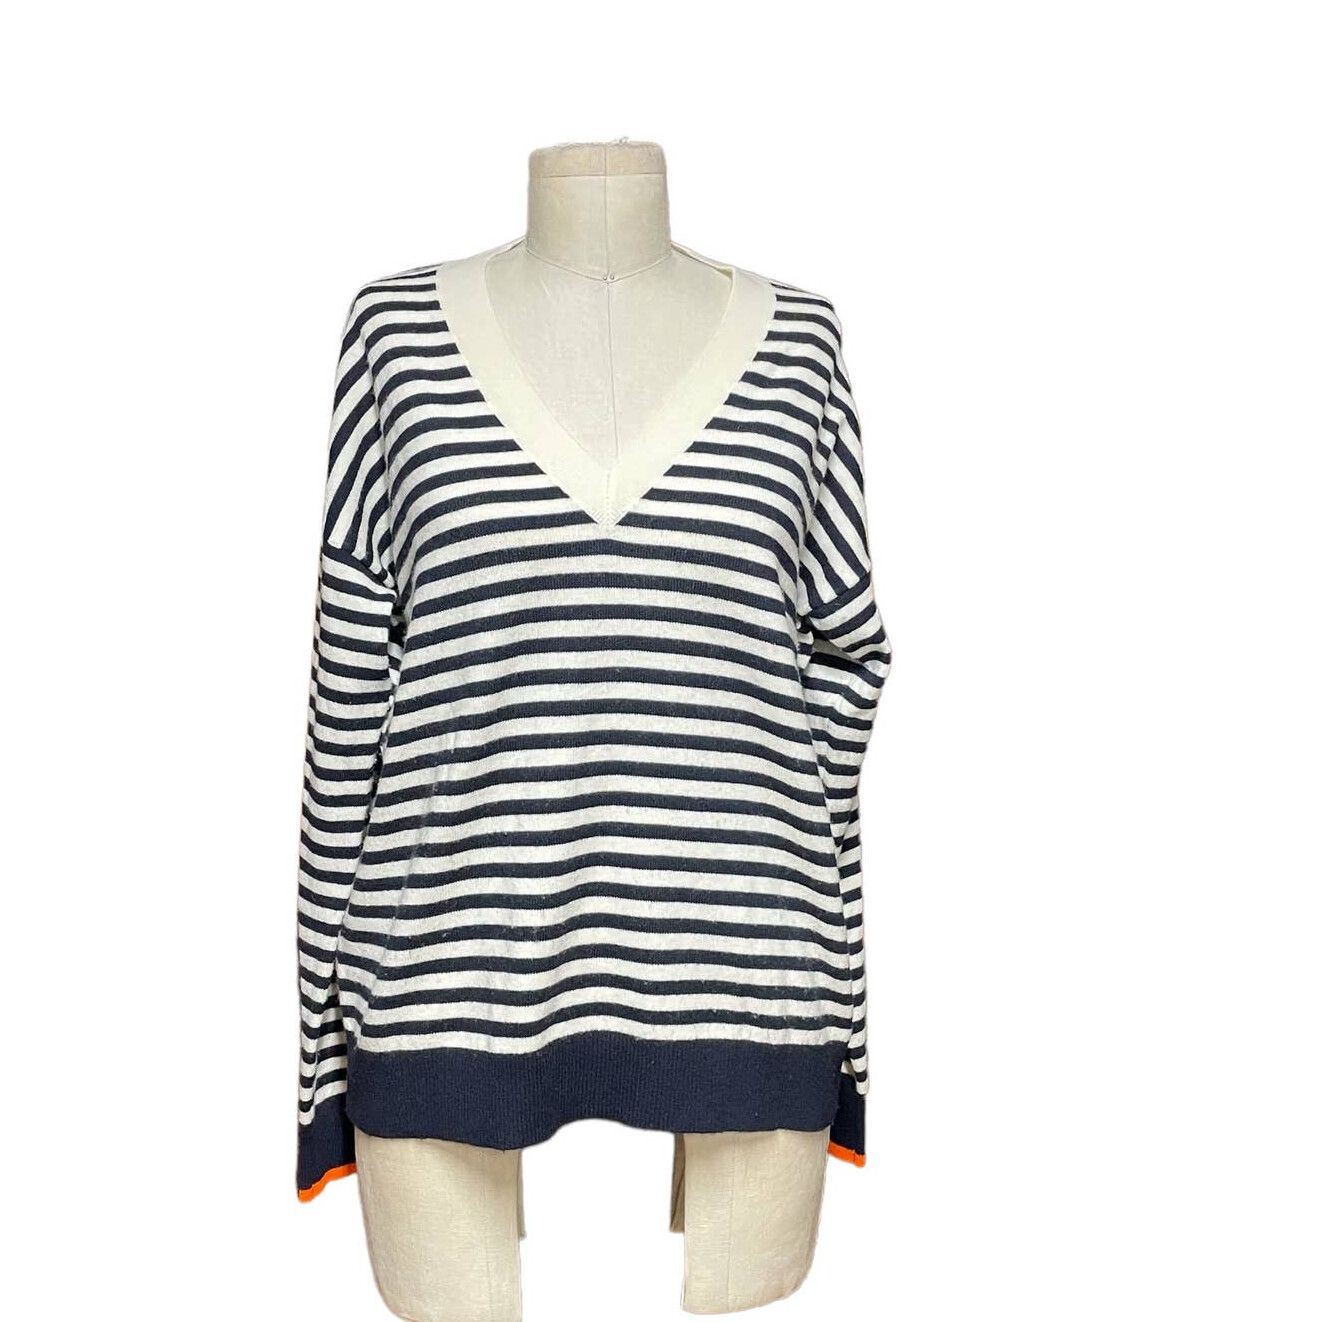 Chinti and Parker Chinti & Parker Navy Blue Cream Stripe Wool Cashmere Sweater Size M / US 6-8 / IT 42-44 - 1 Preview